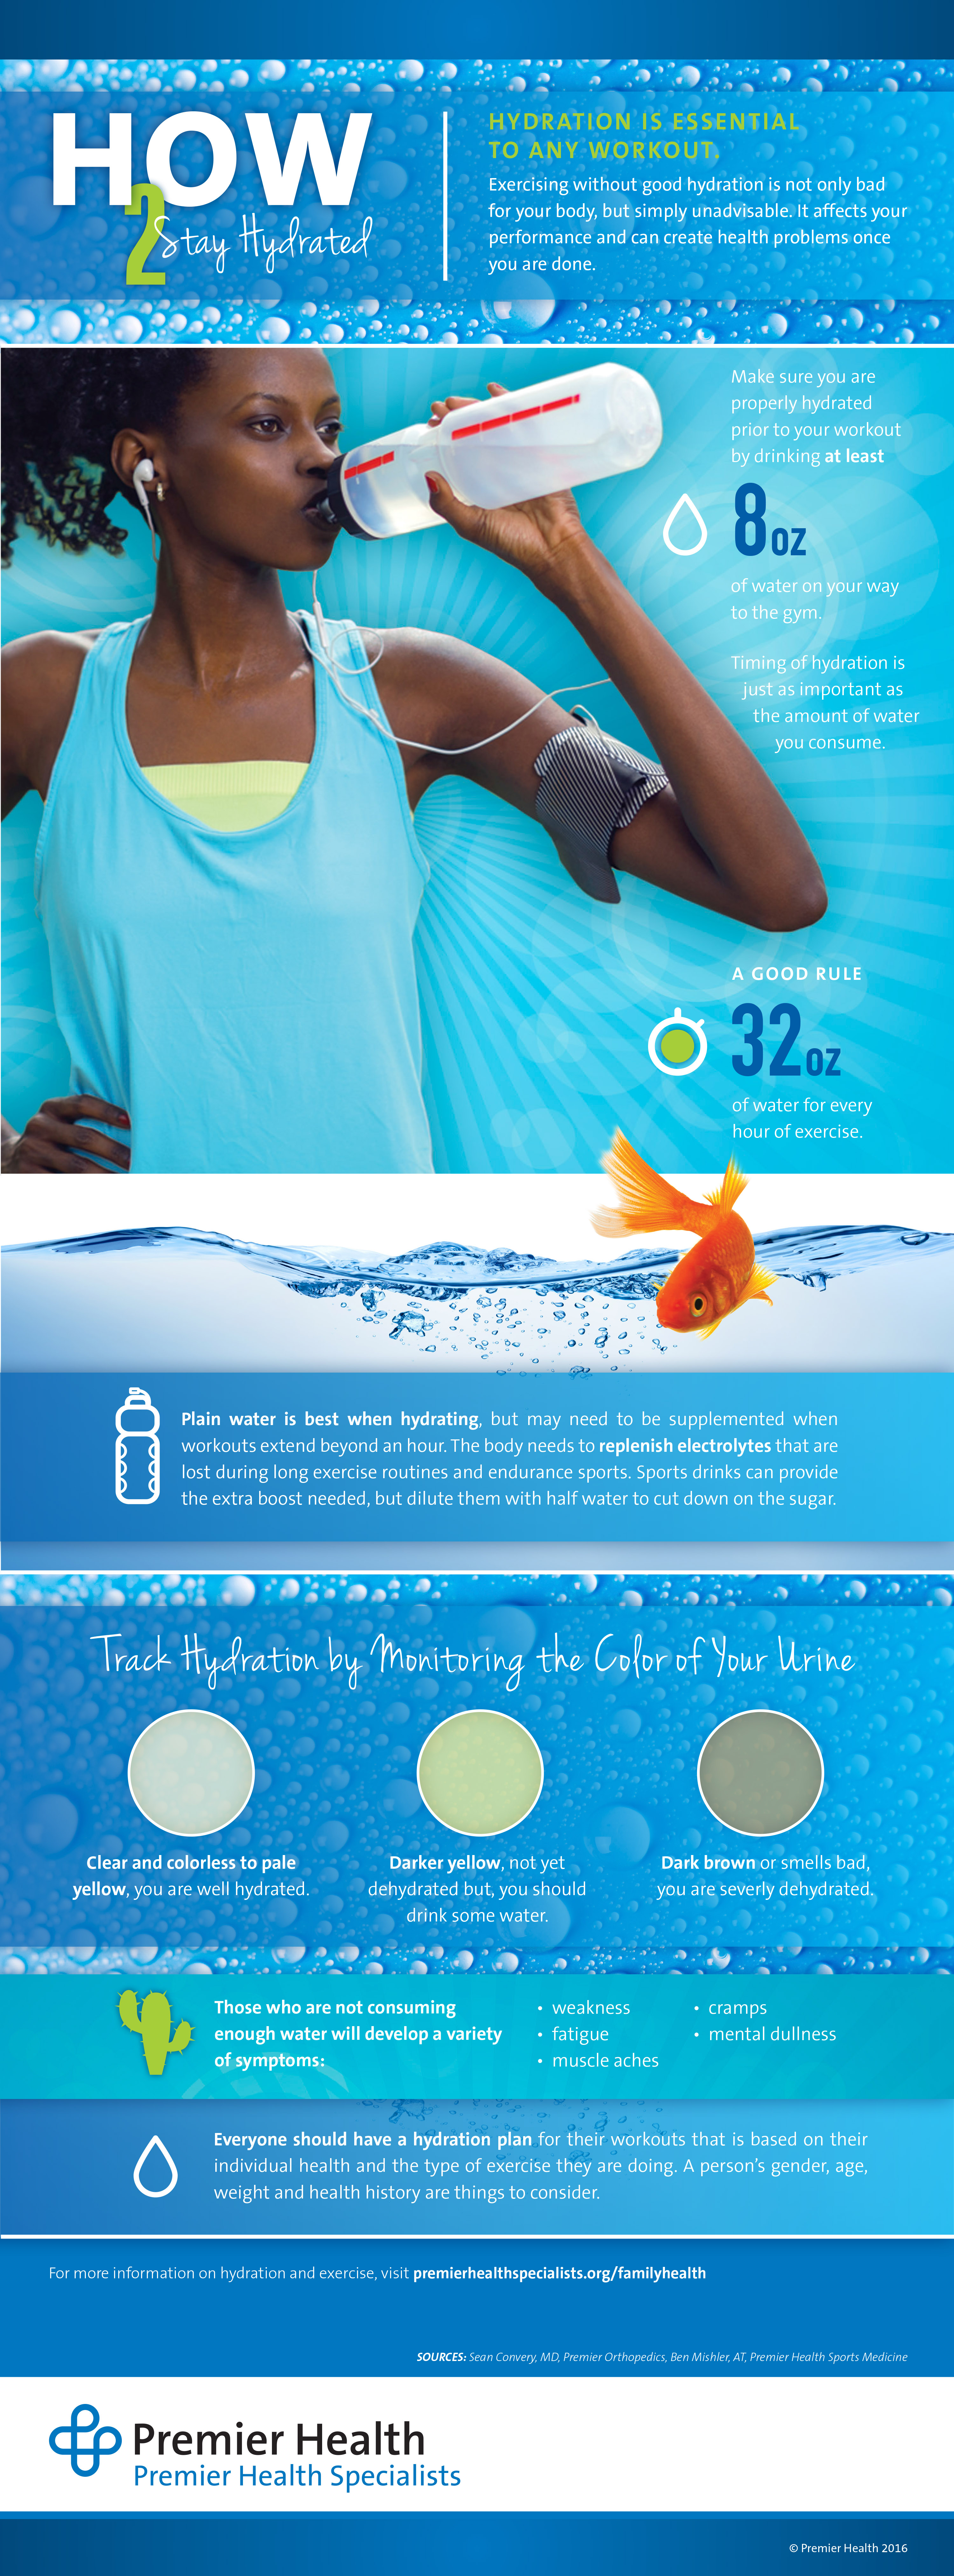 Hydration Infographic in content image